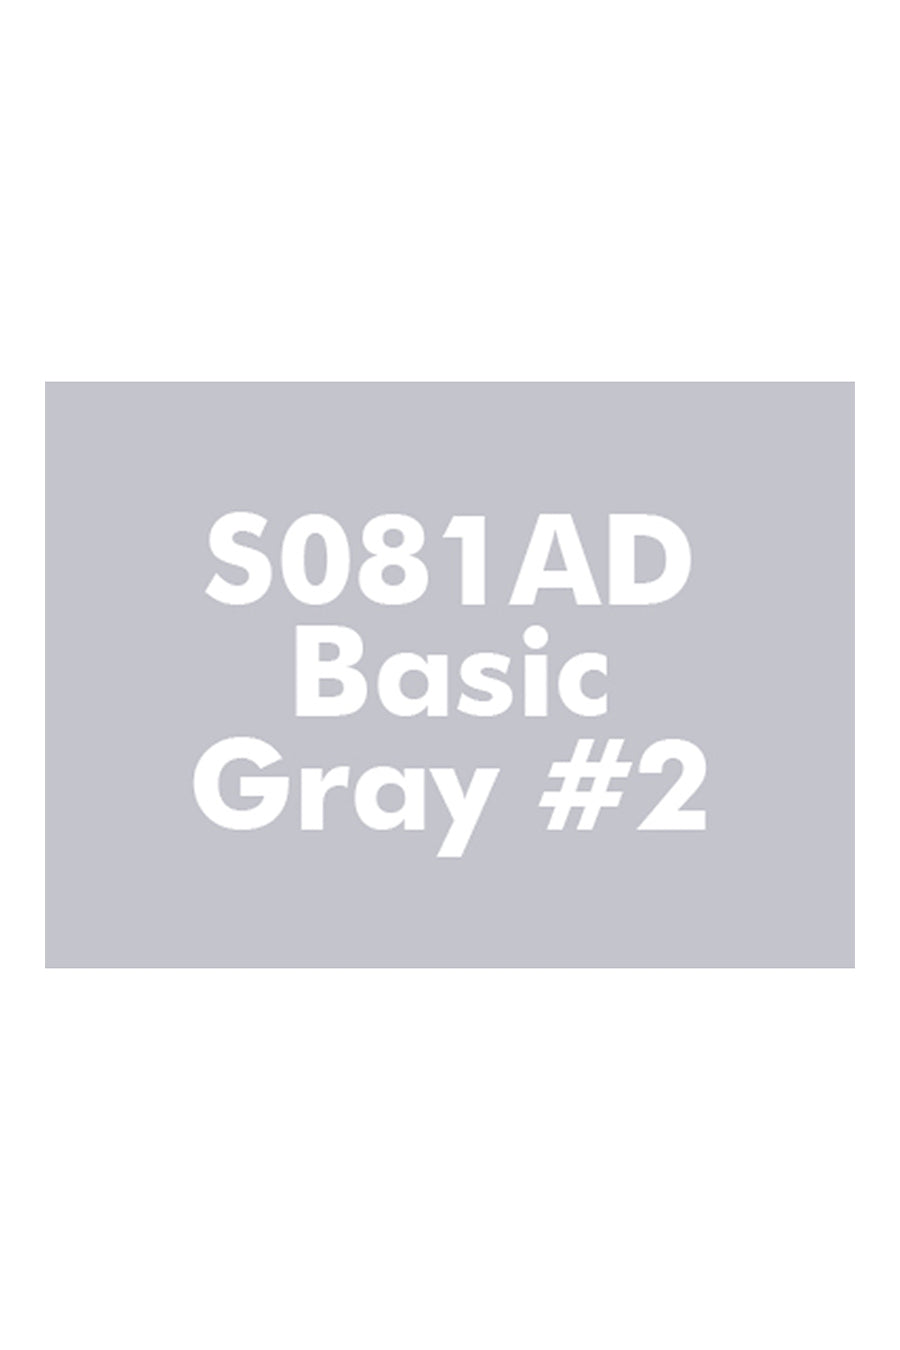 SPECTRA AD COOL GRAY 90%